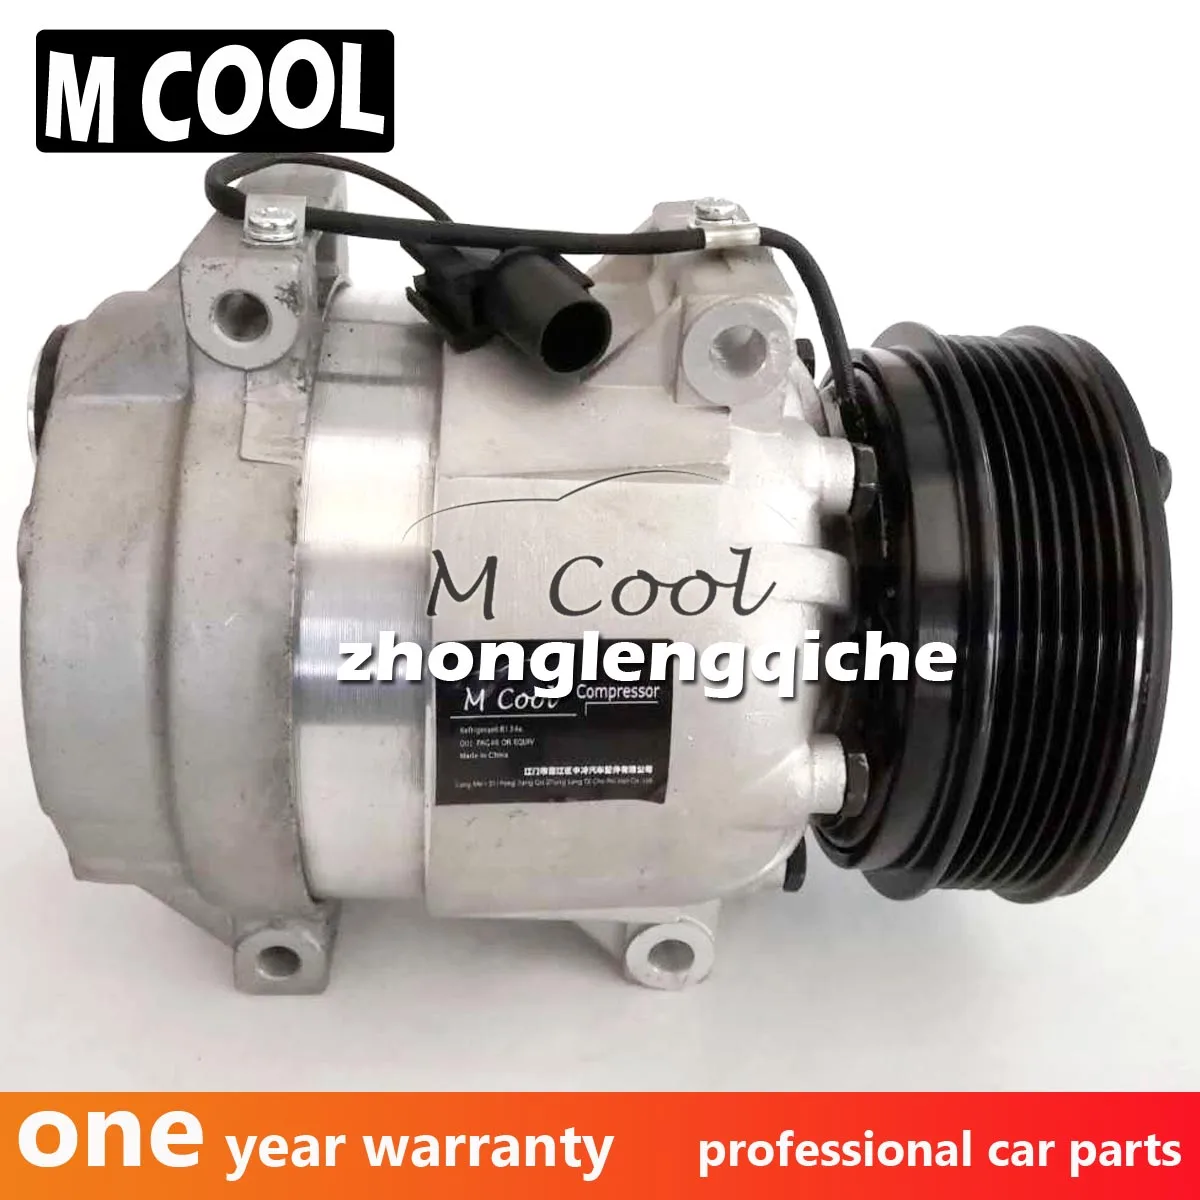 Car Air Conditioner AC Compressor For SsangYong Rexton 2.7 2.9 3.2 2002-2006 6611304415 714956 6611304915 6611305011 TSP0155880